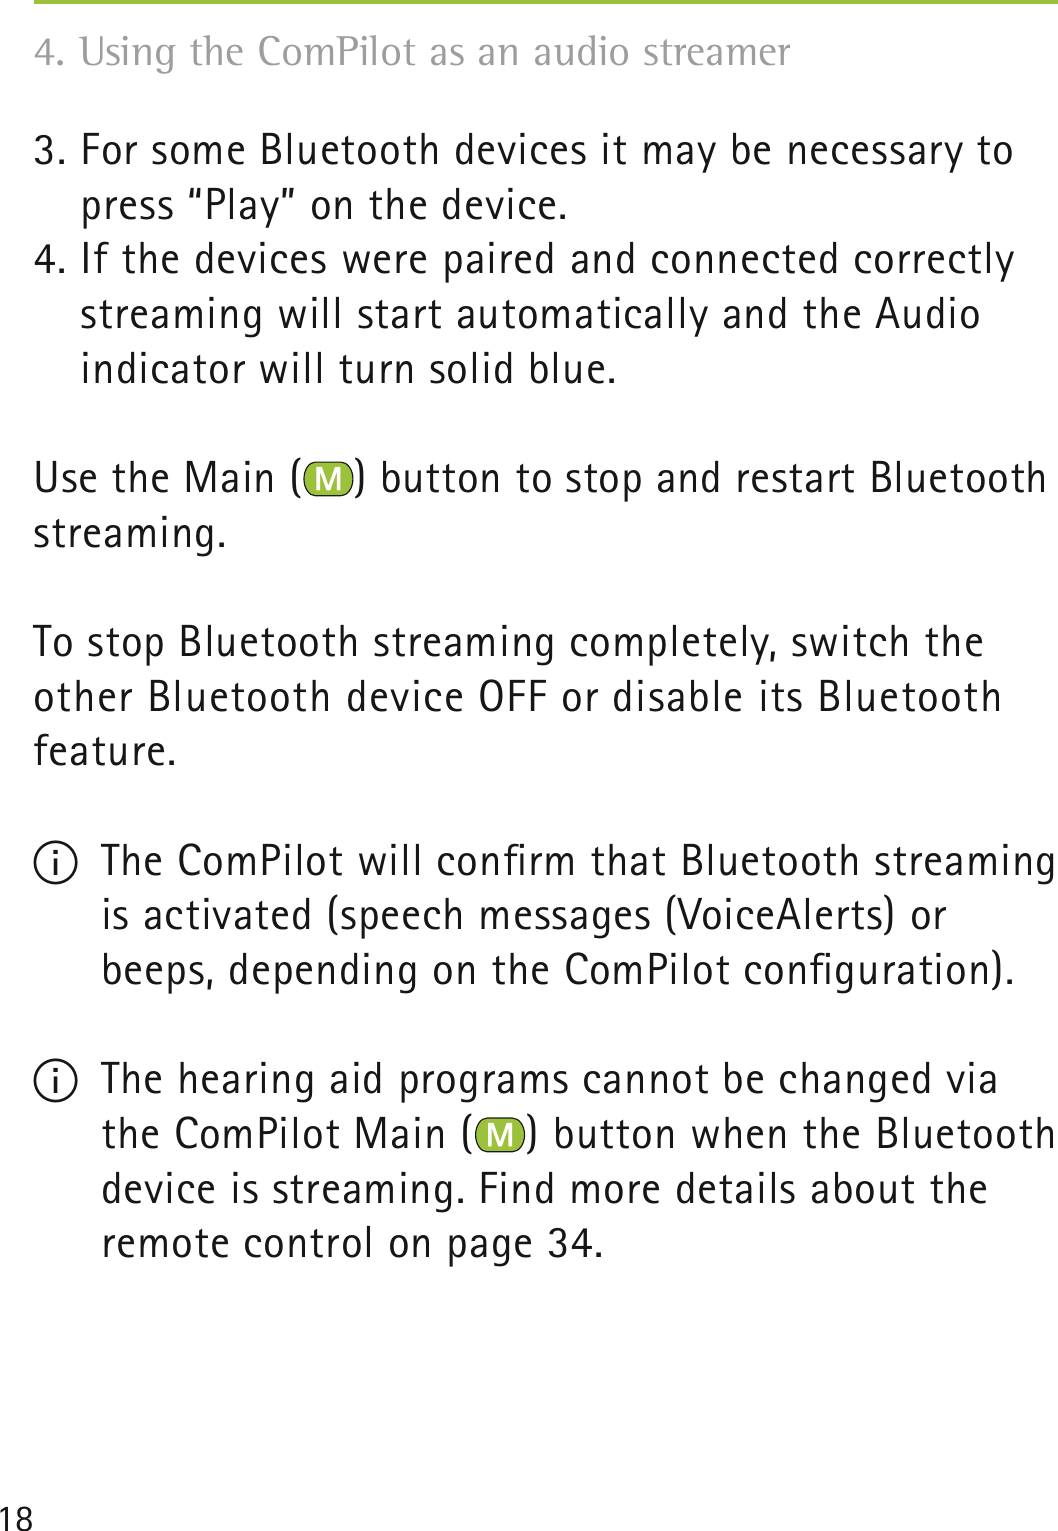 184. Using the ComPilot as an audio streamer 3. For some Bluetooth devices it may be necessary to press “Play” on the device.4. If the devices were paired and connected correctly streaming will start automatically and the Audio  indicator will turn solid blue.Use the Main ( ) button to stop and restart Bluetooth streaming.To stop Bluetooth streaming completely, switch the other Bluetooth device OFF or disable its Bluetooth feature.  I  The ComPilot will conﬁrm that Bluetooth streaming is activated (speech messages (VoiceAlerts) or beeps, depending on the ComPilot conﬁguration).I  The hearing aid programs cannot be changed via the ComPilot Main ( ) button when the Bluetooth  device is streaming. Find more details about the  remote control on page 34.